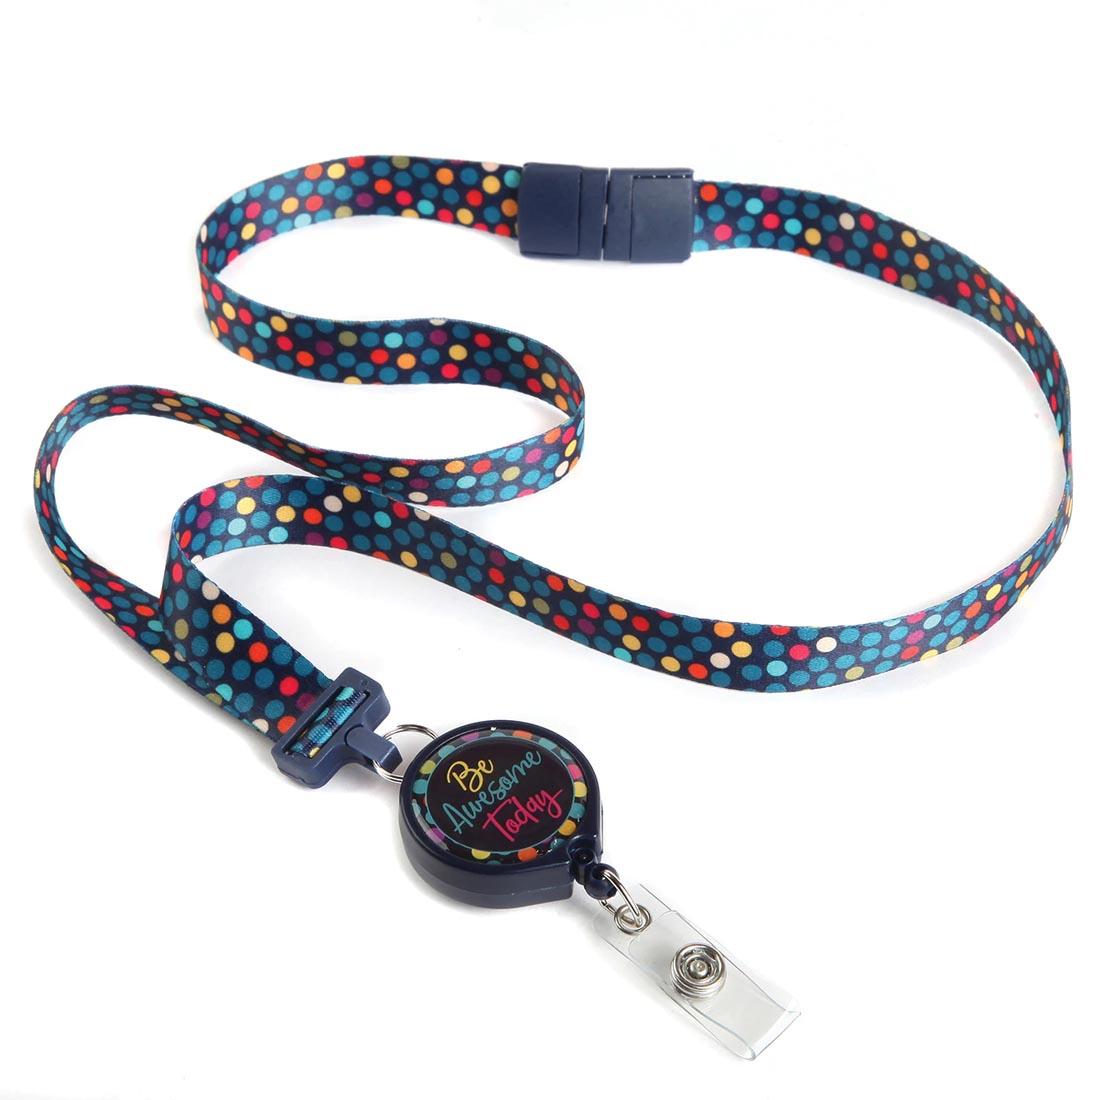 Polka Dot Ribbon Lanyard With Badge Reel that says Be Awesome Today